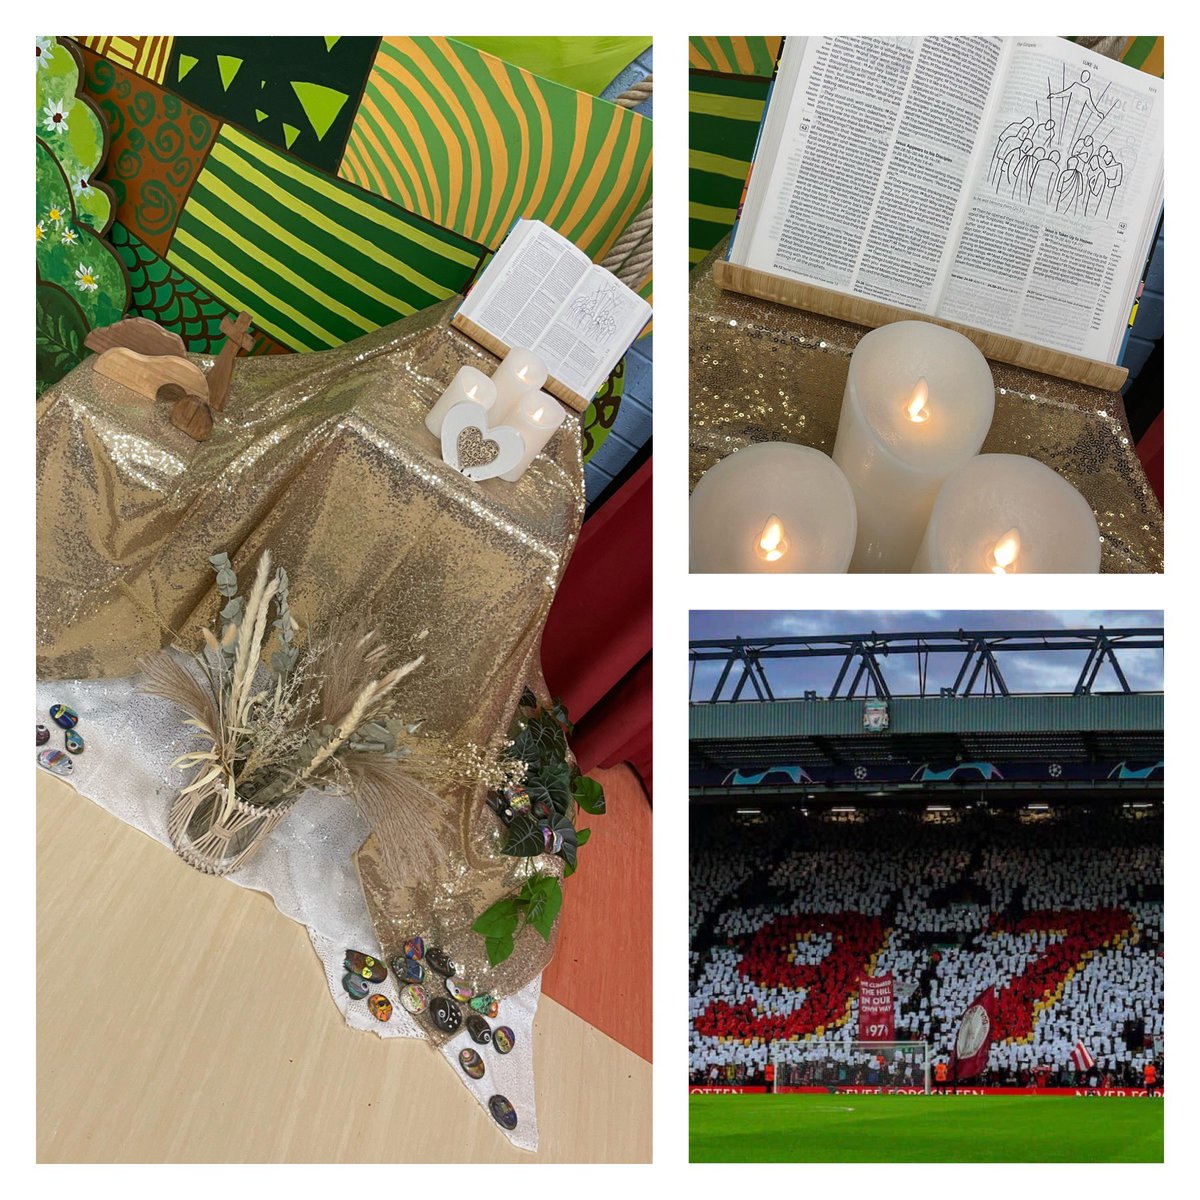 We’re back at school after the Easter break and we begin our week with a focus on ‘courage’. We ask God for help as we do our best to be brave in all that we attempt. On the 35th anniversary, we also remember all of those affected by the Hillsborough disaster #97 🙏🏼❤️ @ALPSITnews